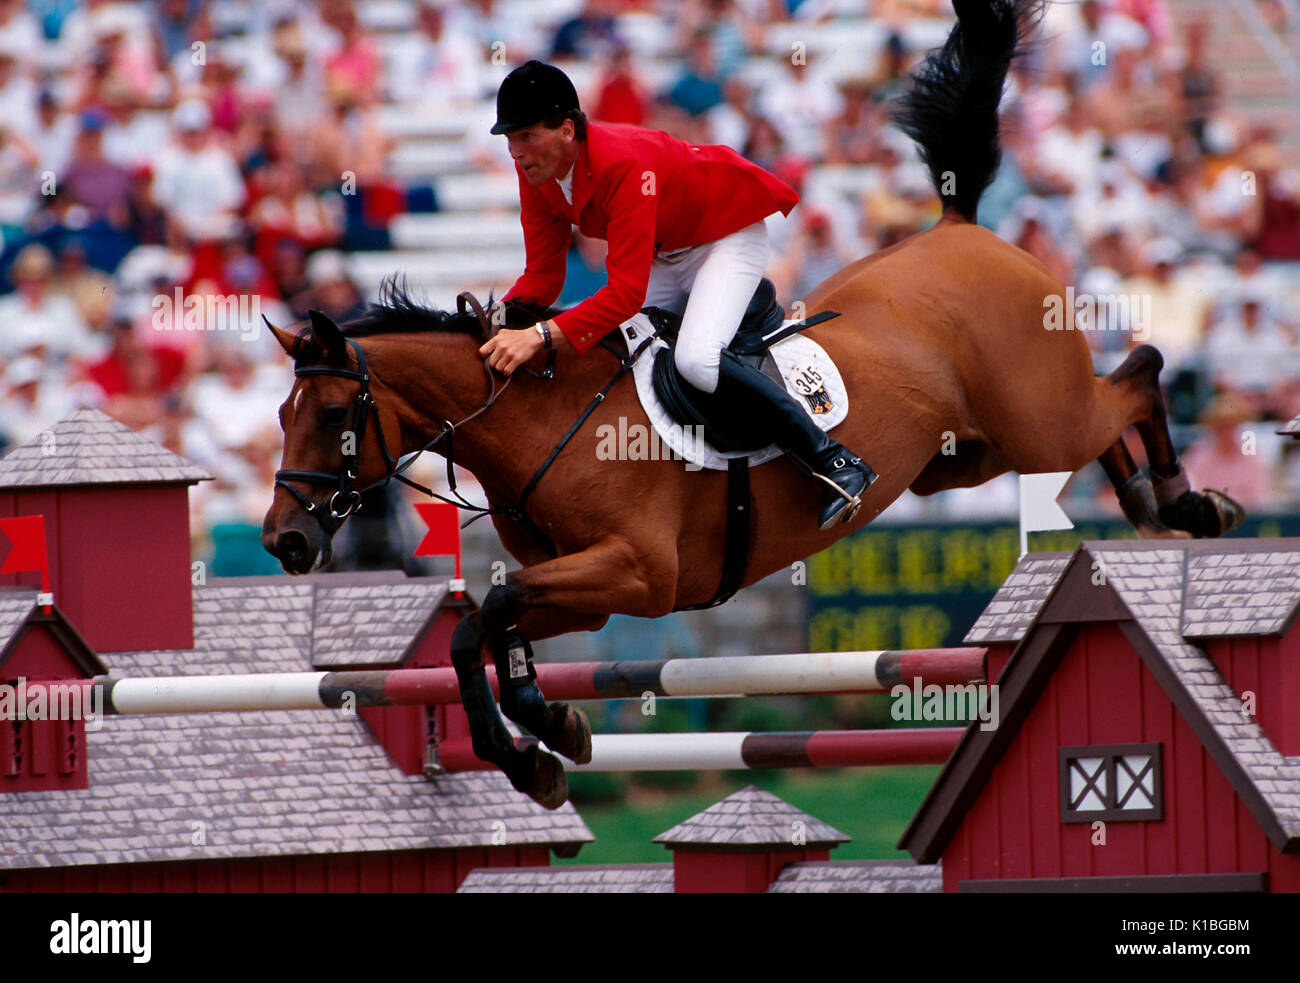 The Olympic Games, Atlanta 1996, Ludger Beerbaum (GER) riding Sprehe Ratina Z Stock Photo